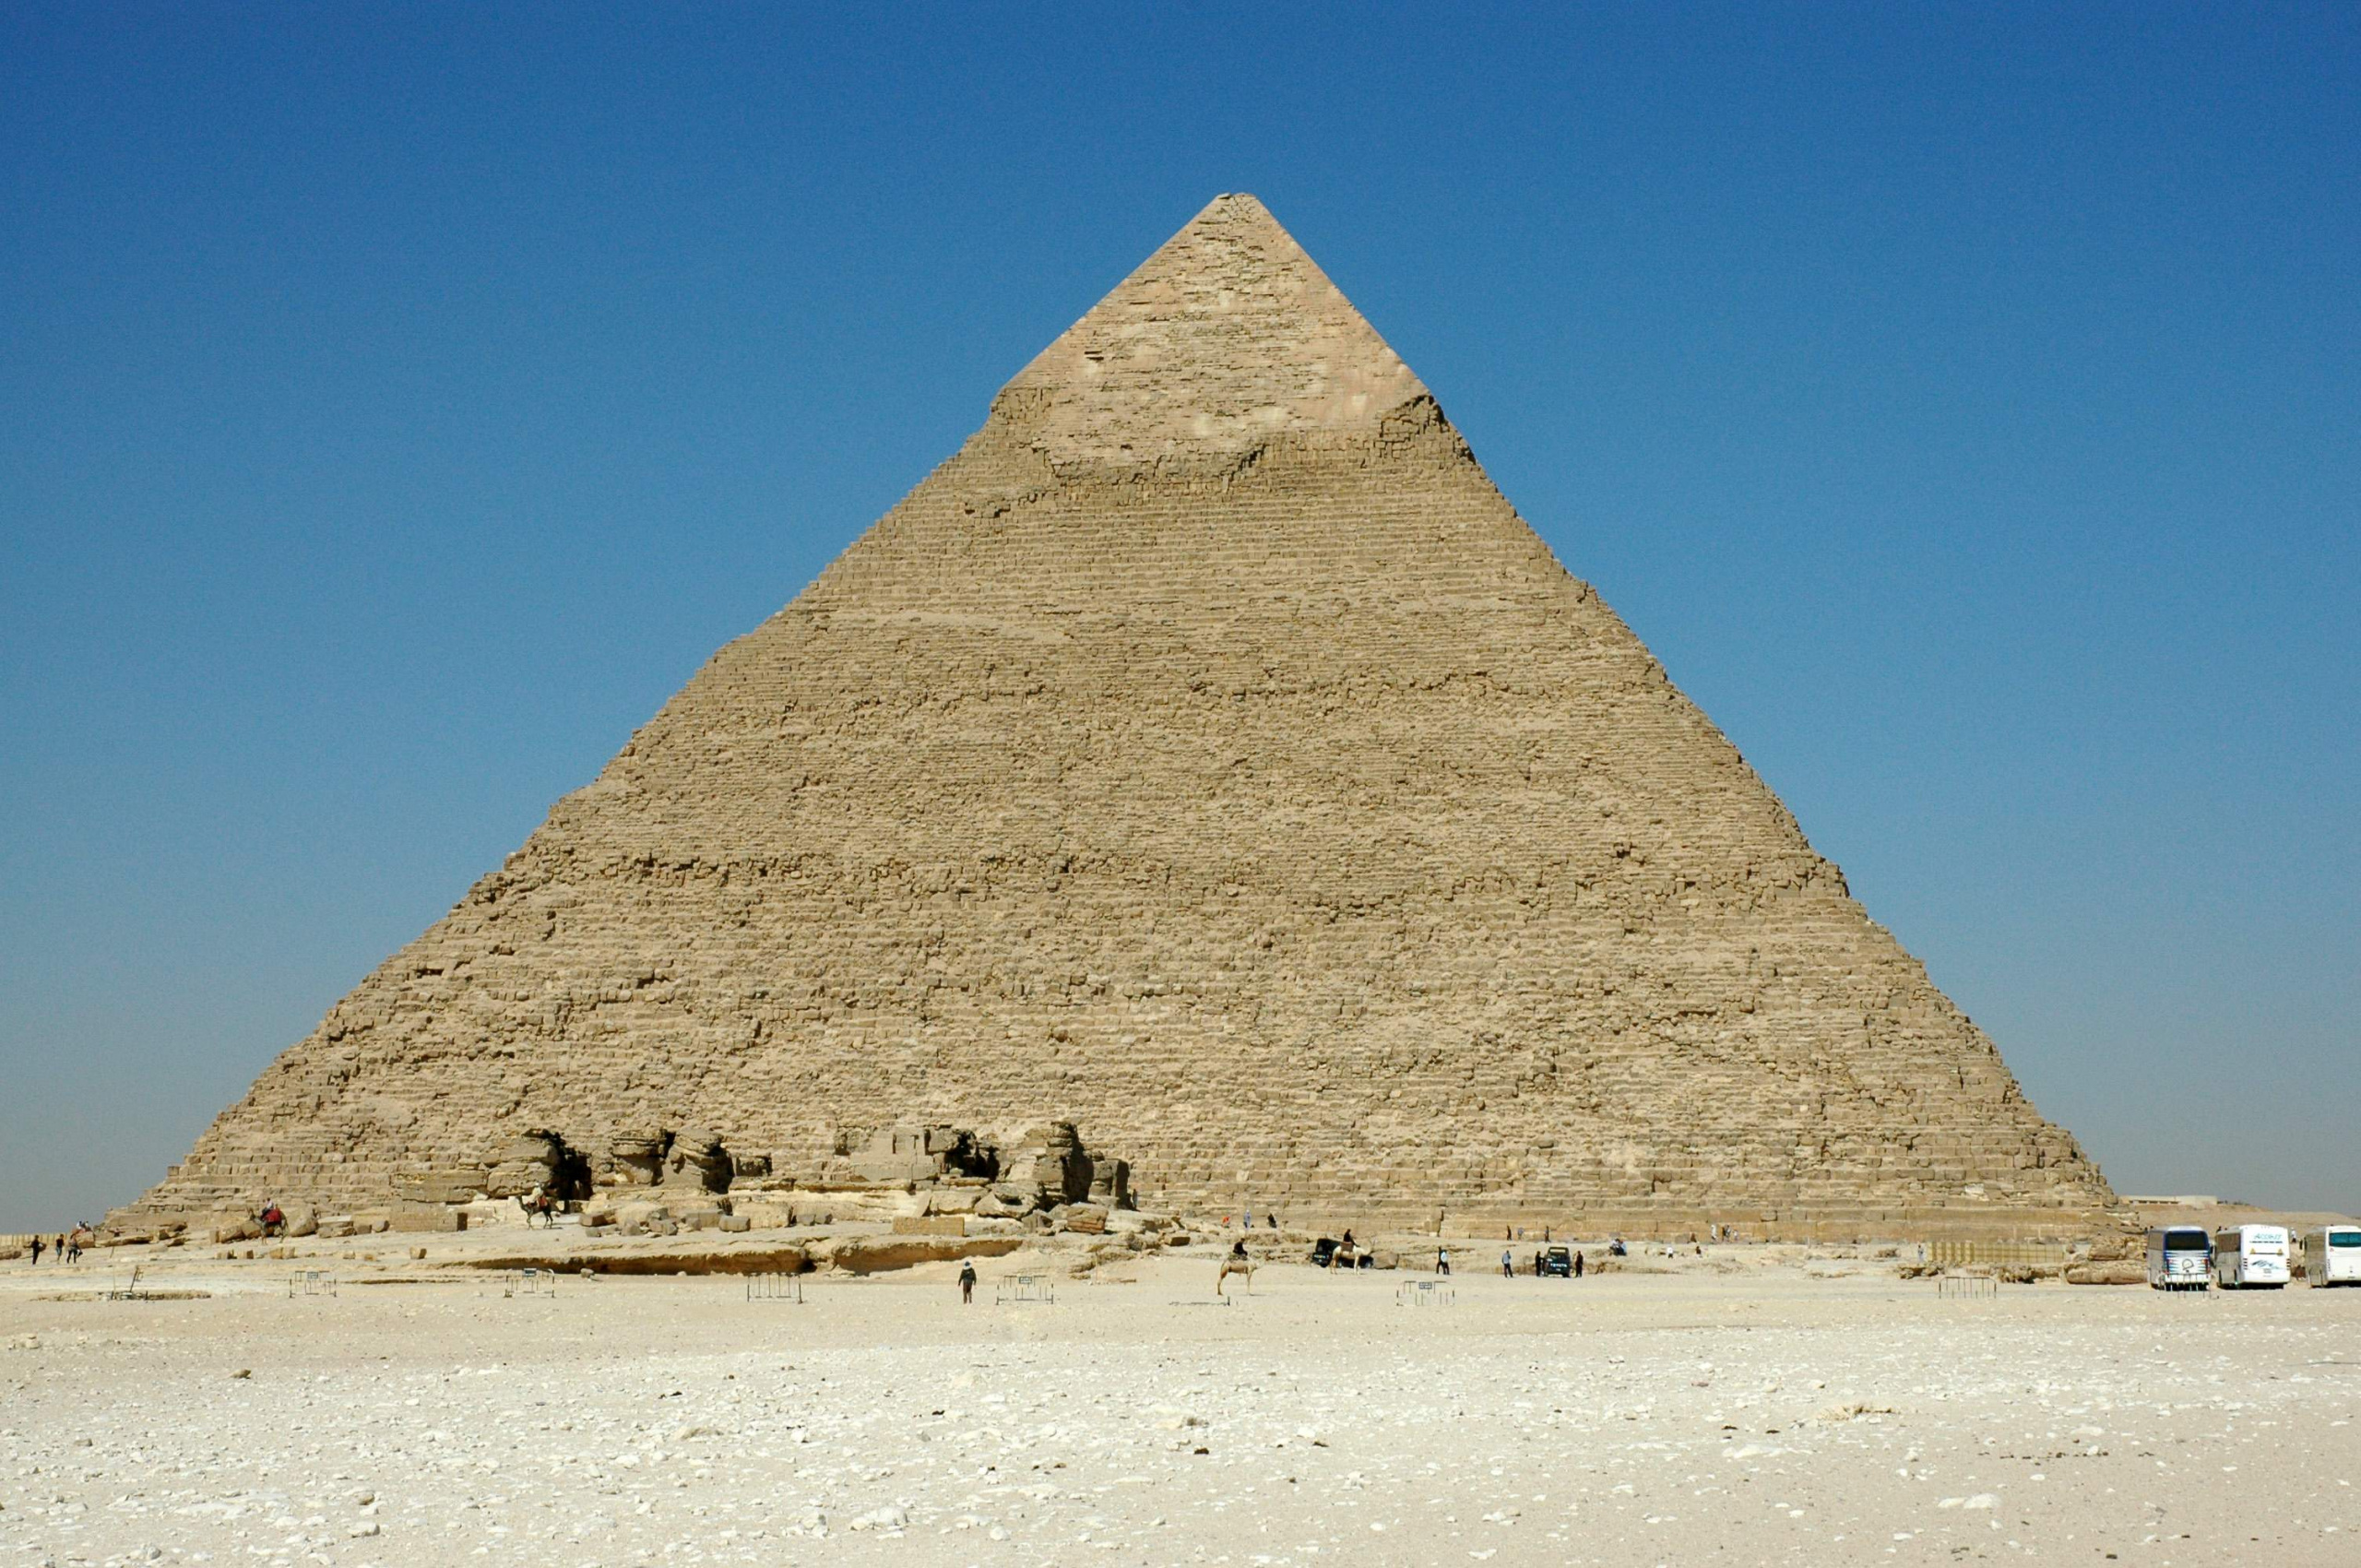 Pyramids of Giza, HD wallpapers for you, Giza's majestic allure, Egypt's most iconic, 2560x1700 HD Desktop